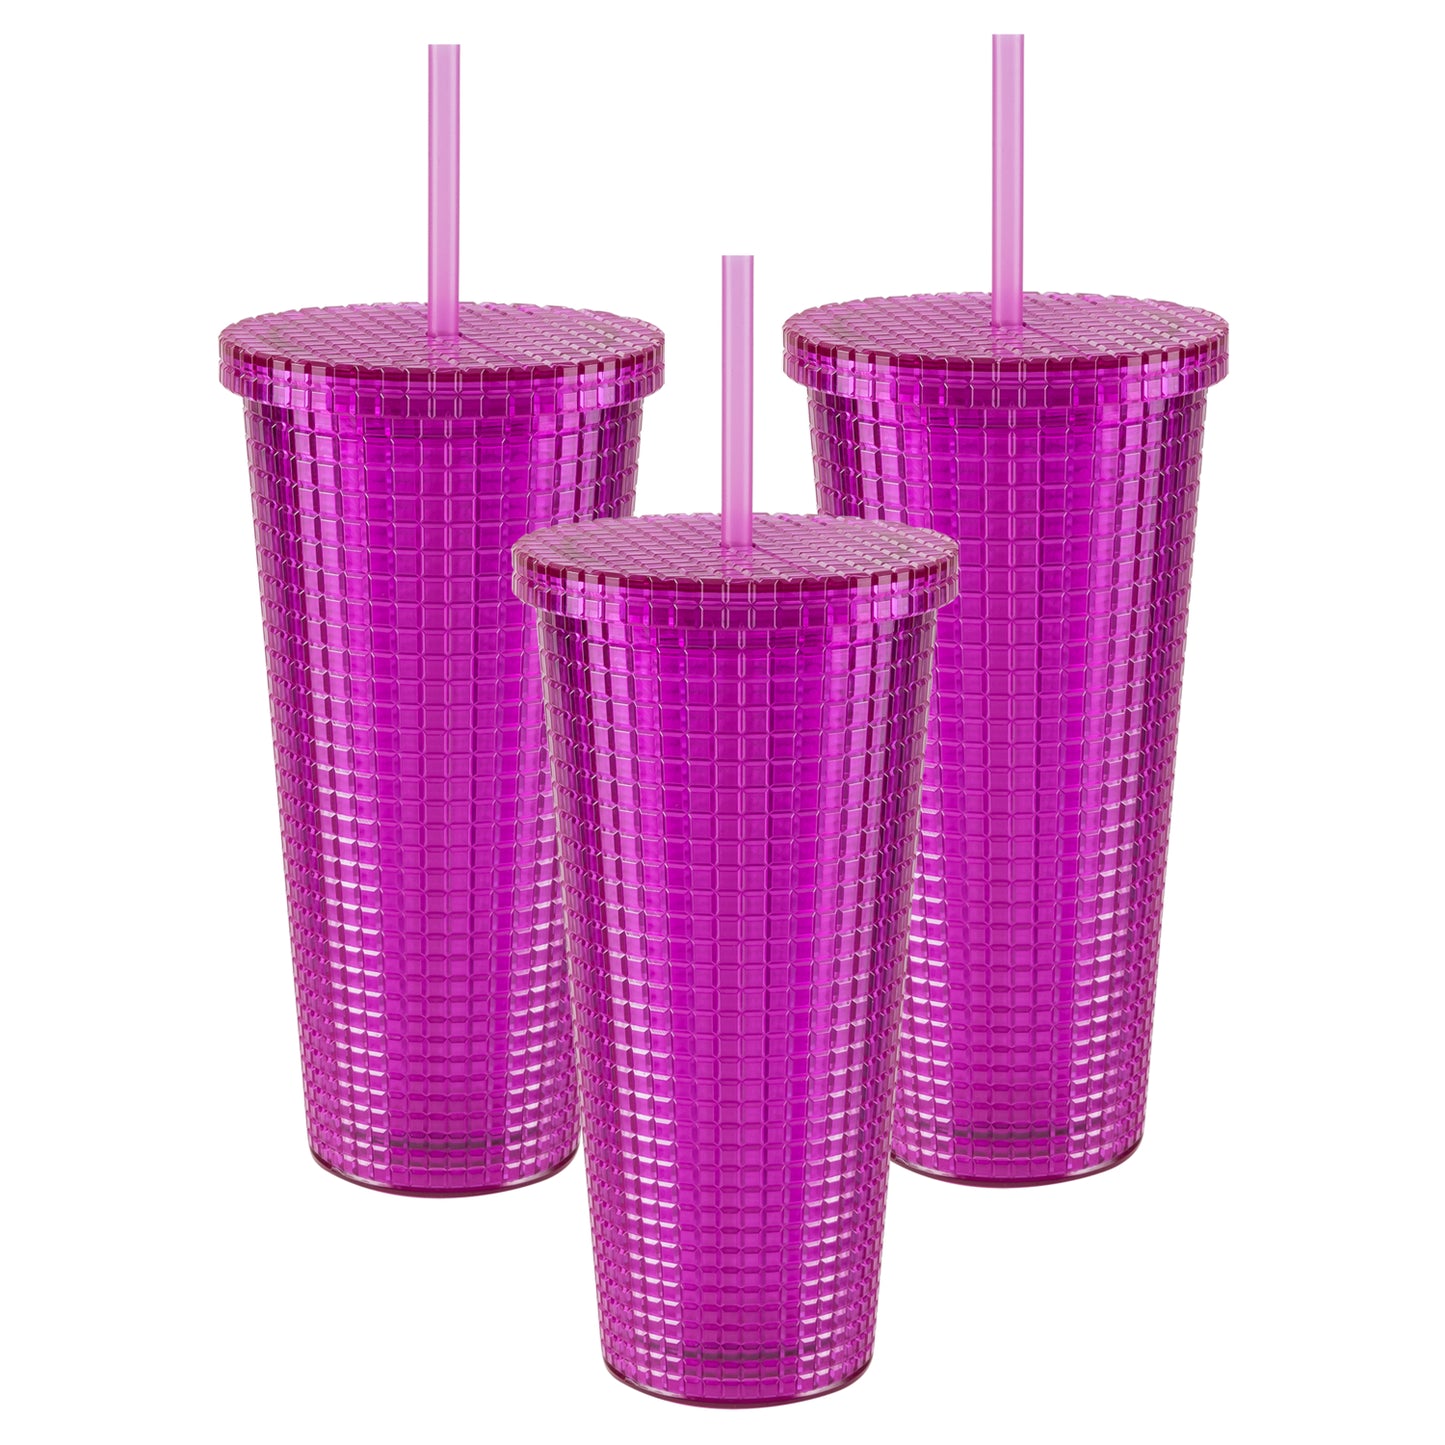 Cool Gear 3-Pack 23 oz Jem Chiller with Reusable Straw | Dishwasher Safe, Spillproof, Double-Wall Insulated Travel Tumbler | Trendy, Textured Design - Plum Pack